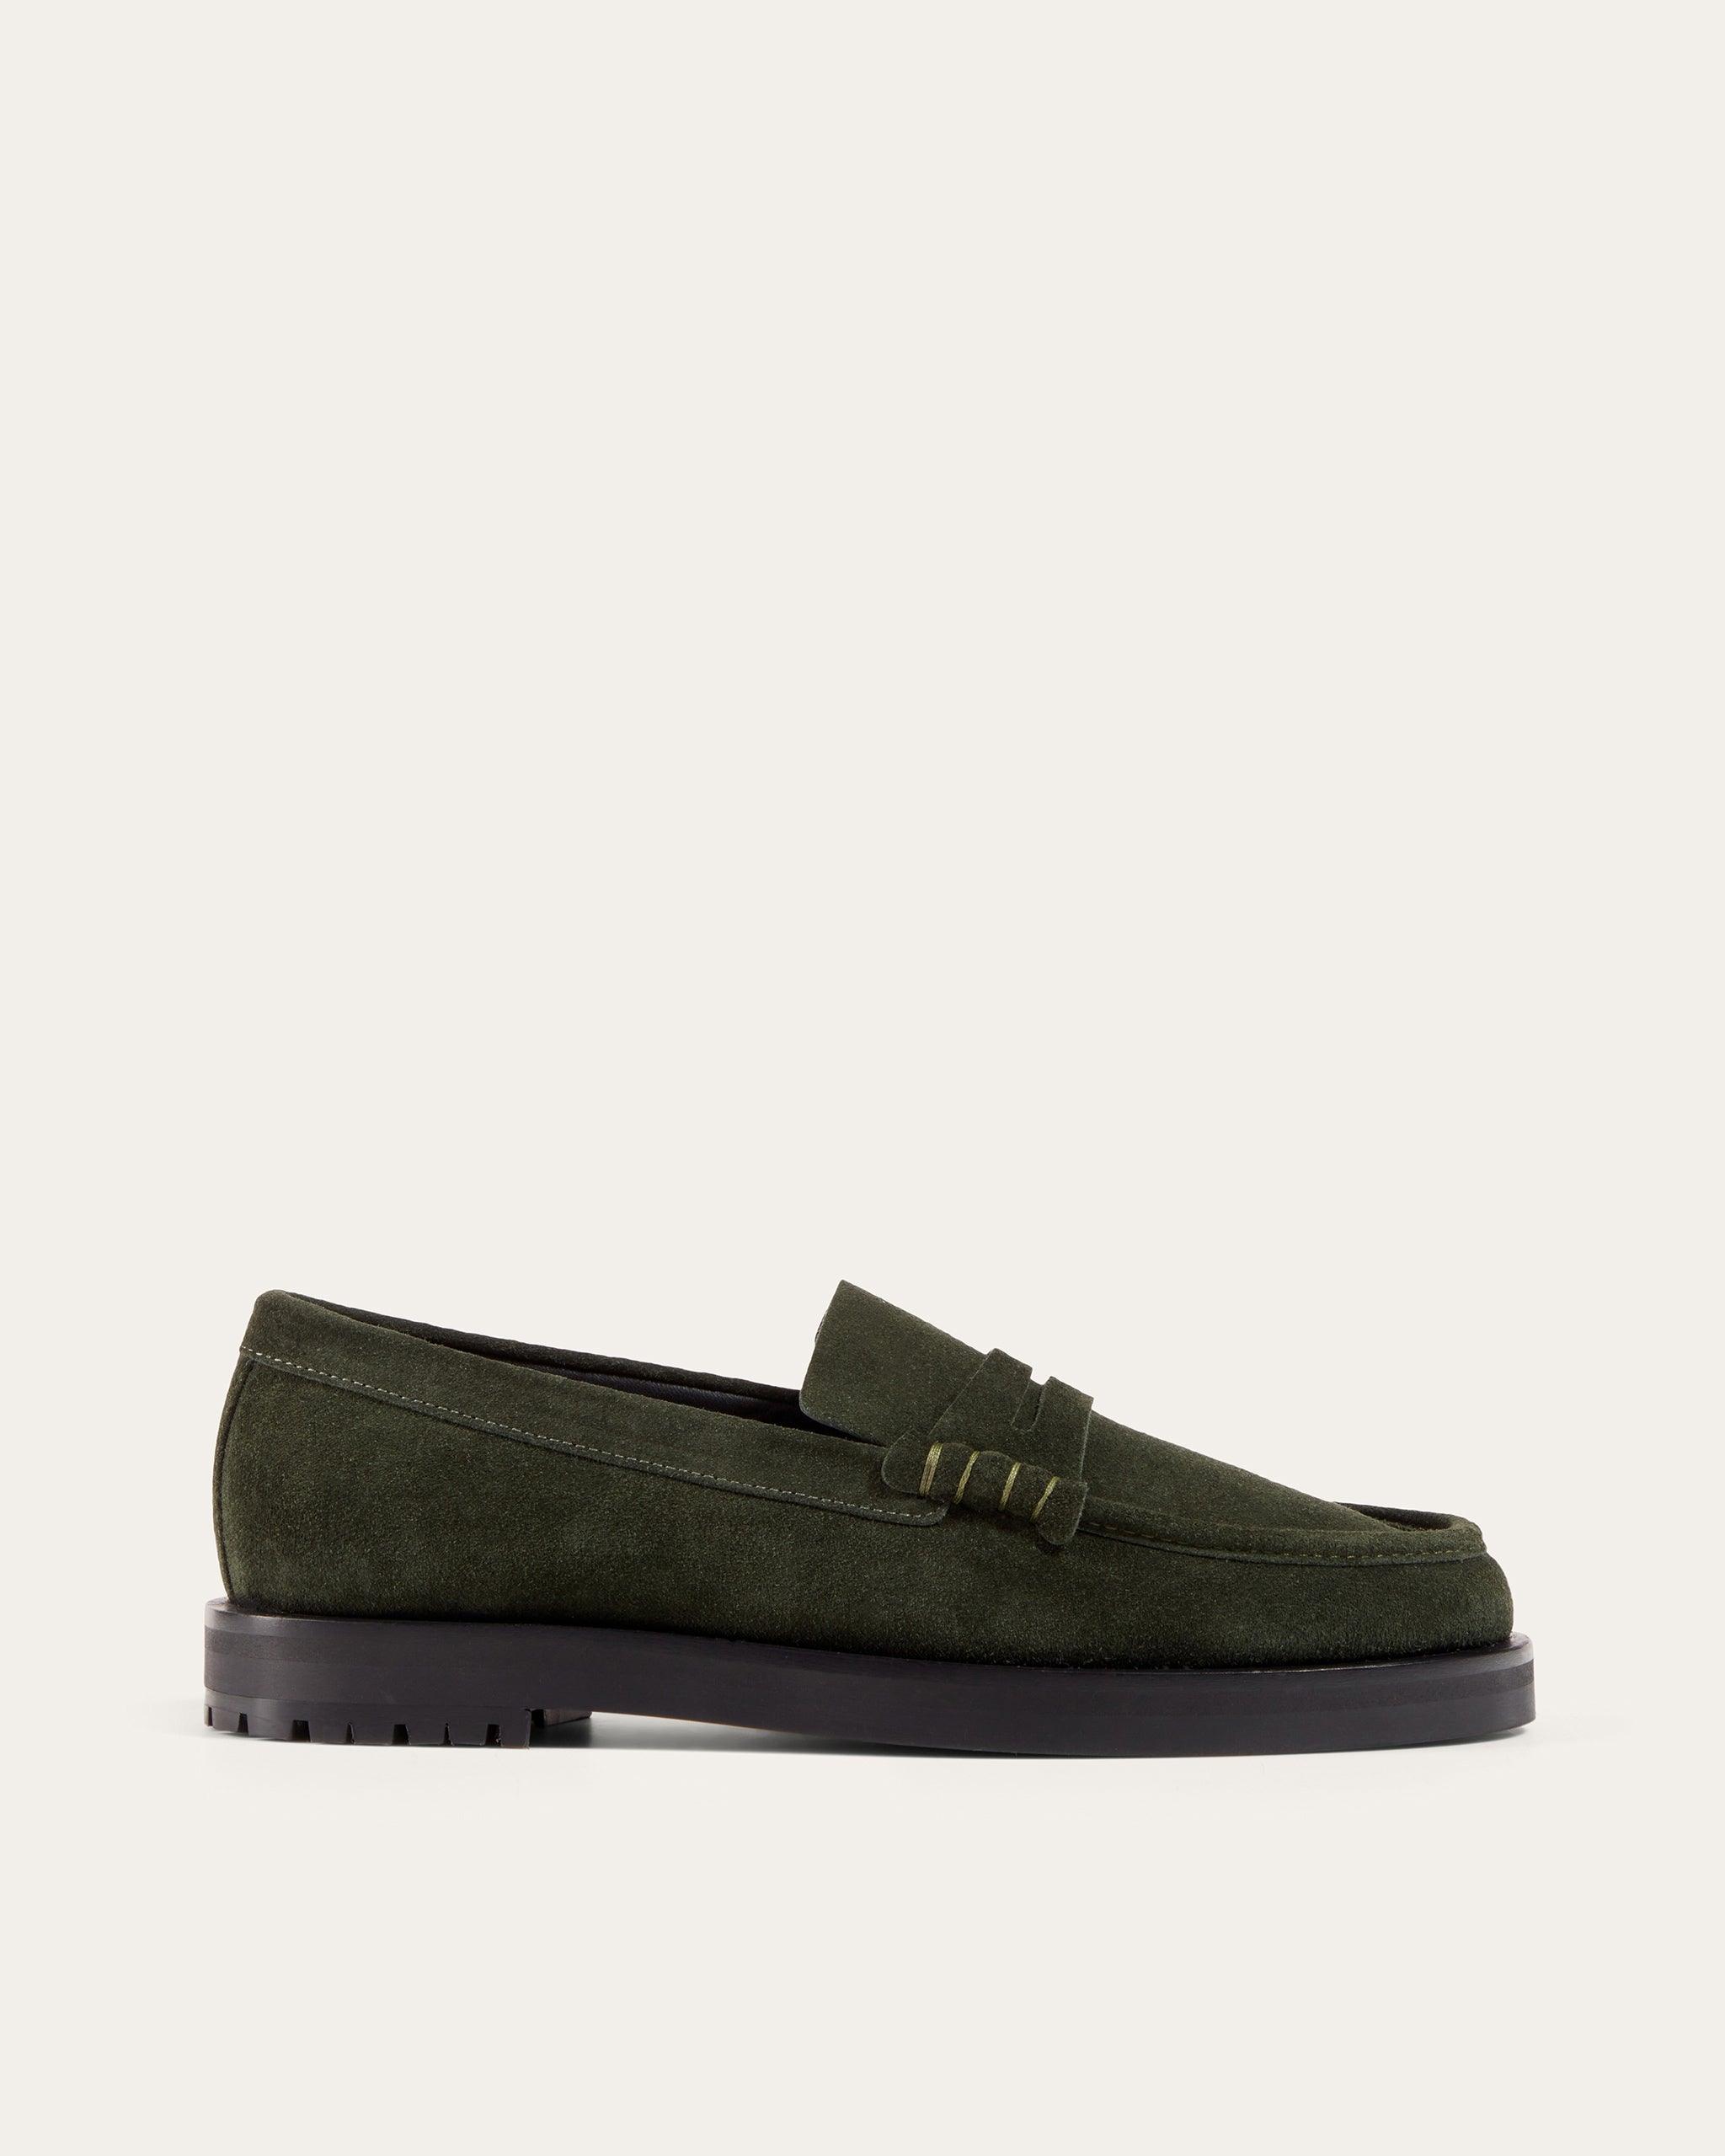 Image of Joss Loafer, Military Green